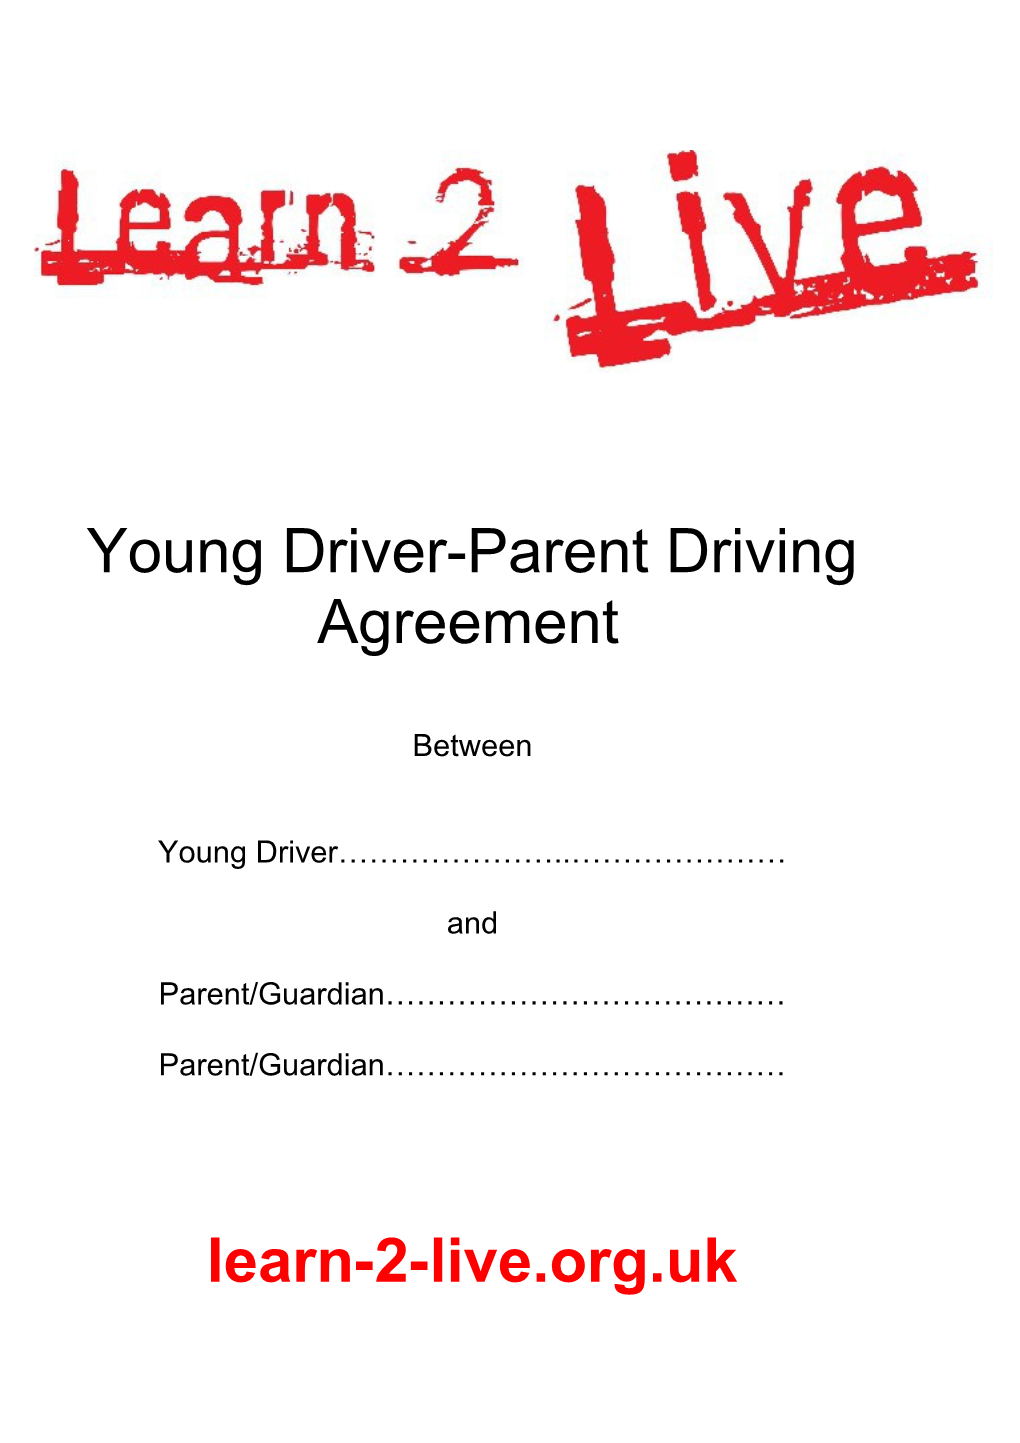 Young Driver-Parent Driving Agreement